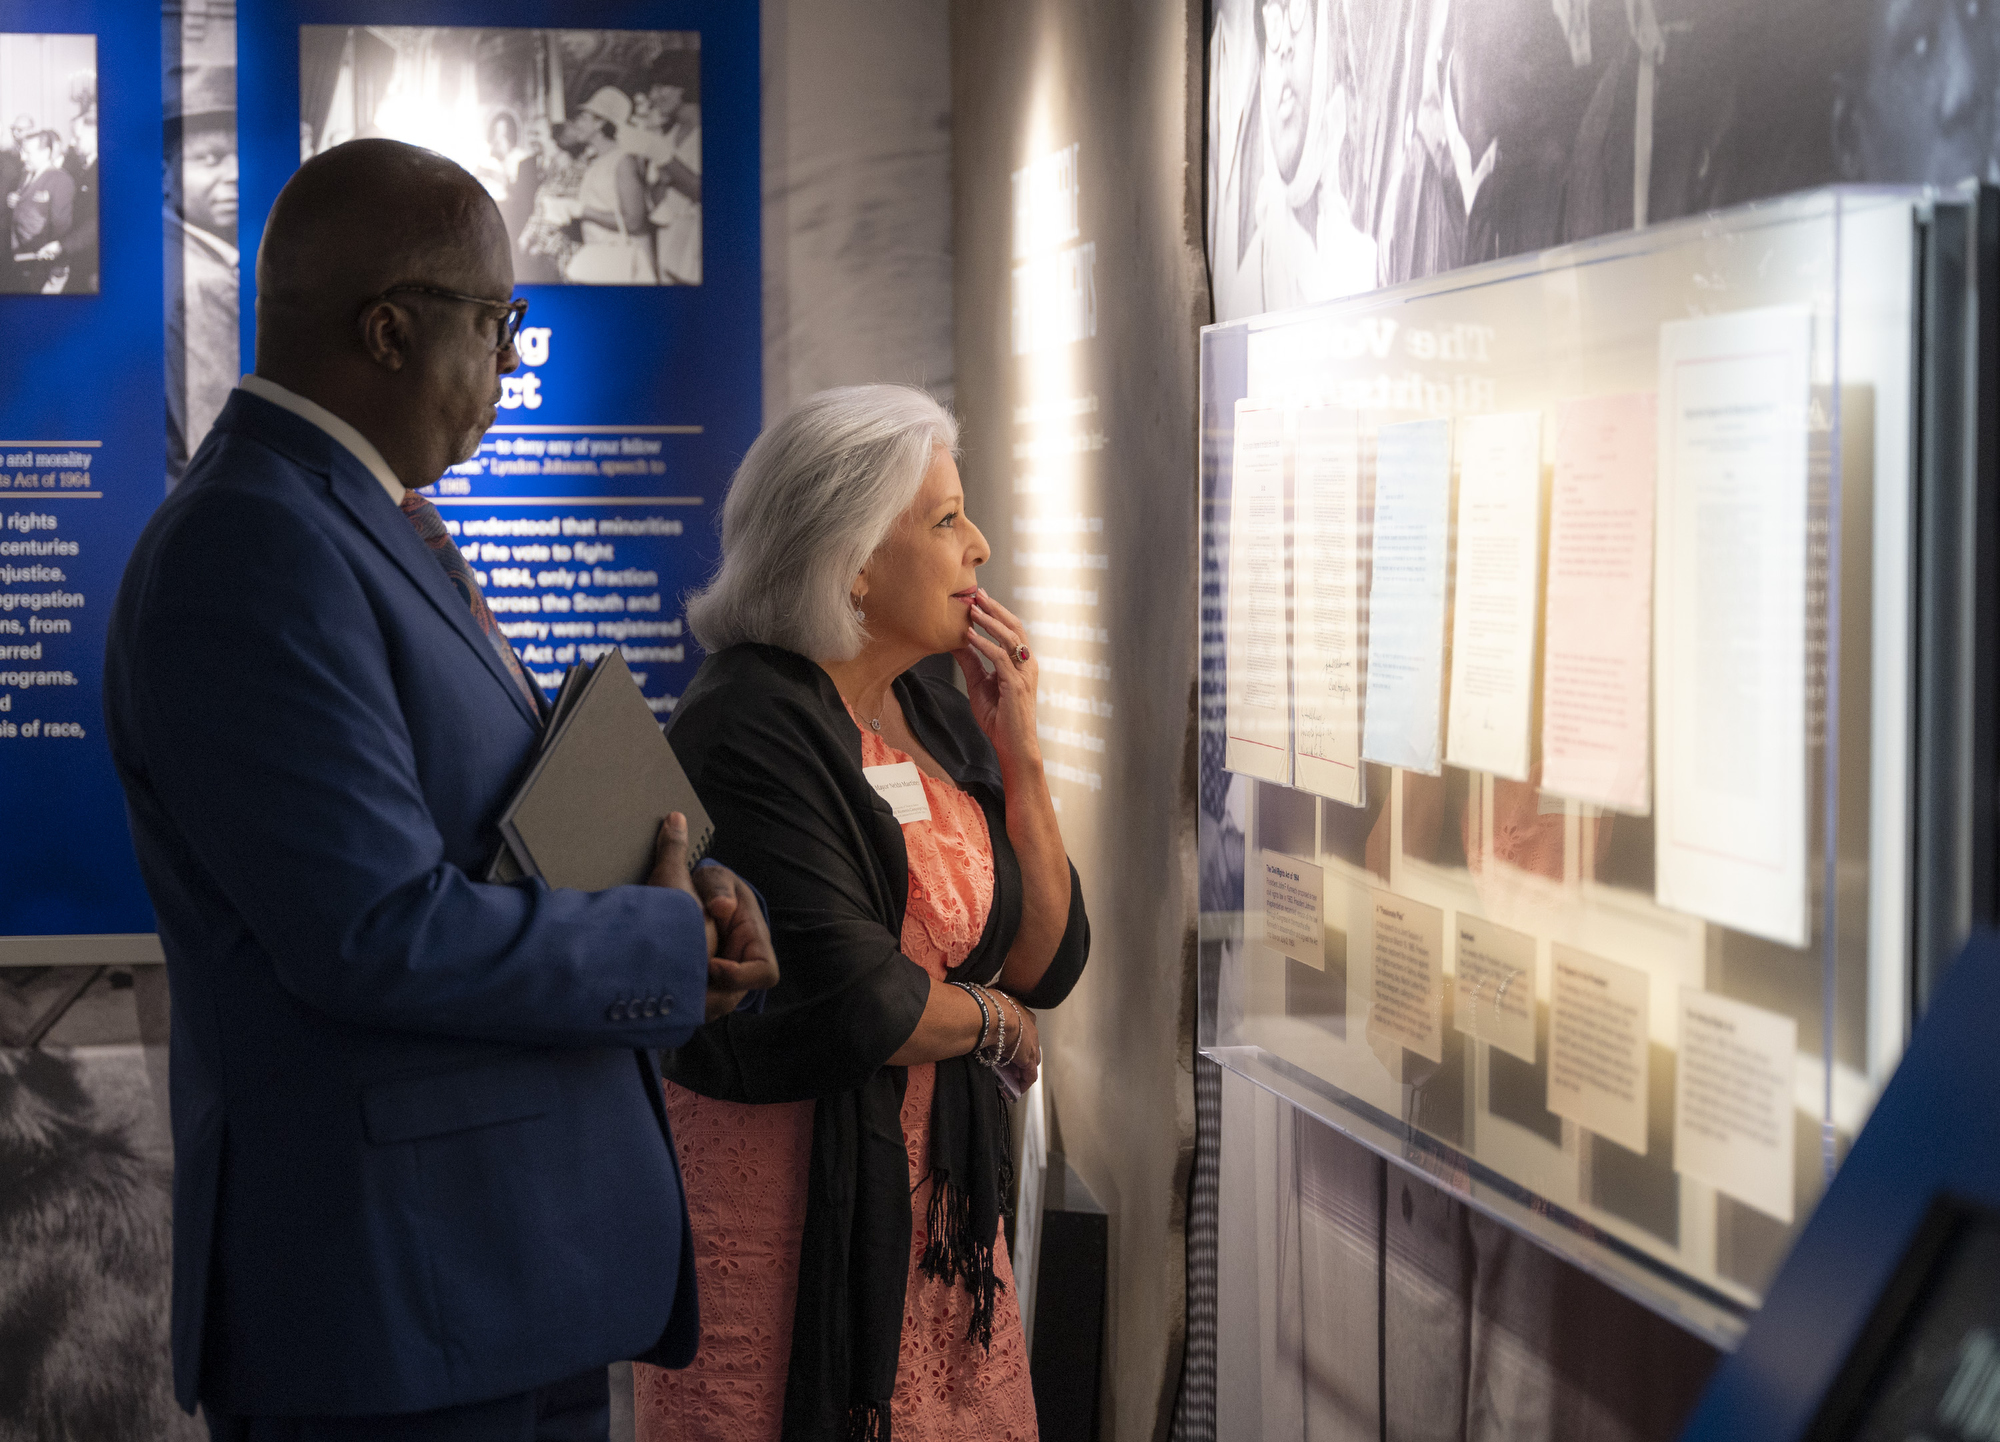 Members of the LBJ Women's Campaign School Founder's Circle tours the LBJ Presidential Library.